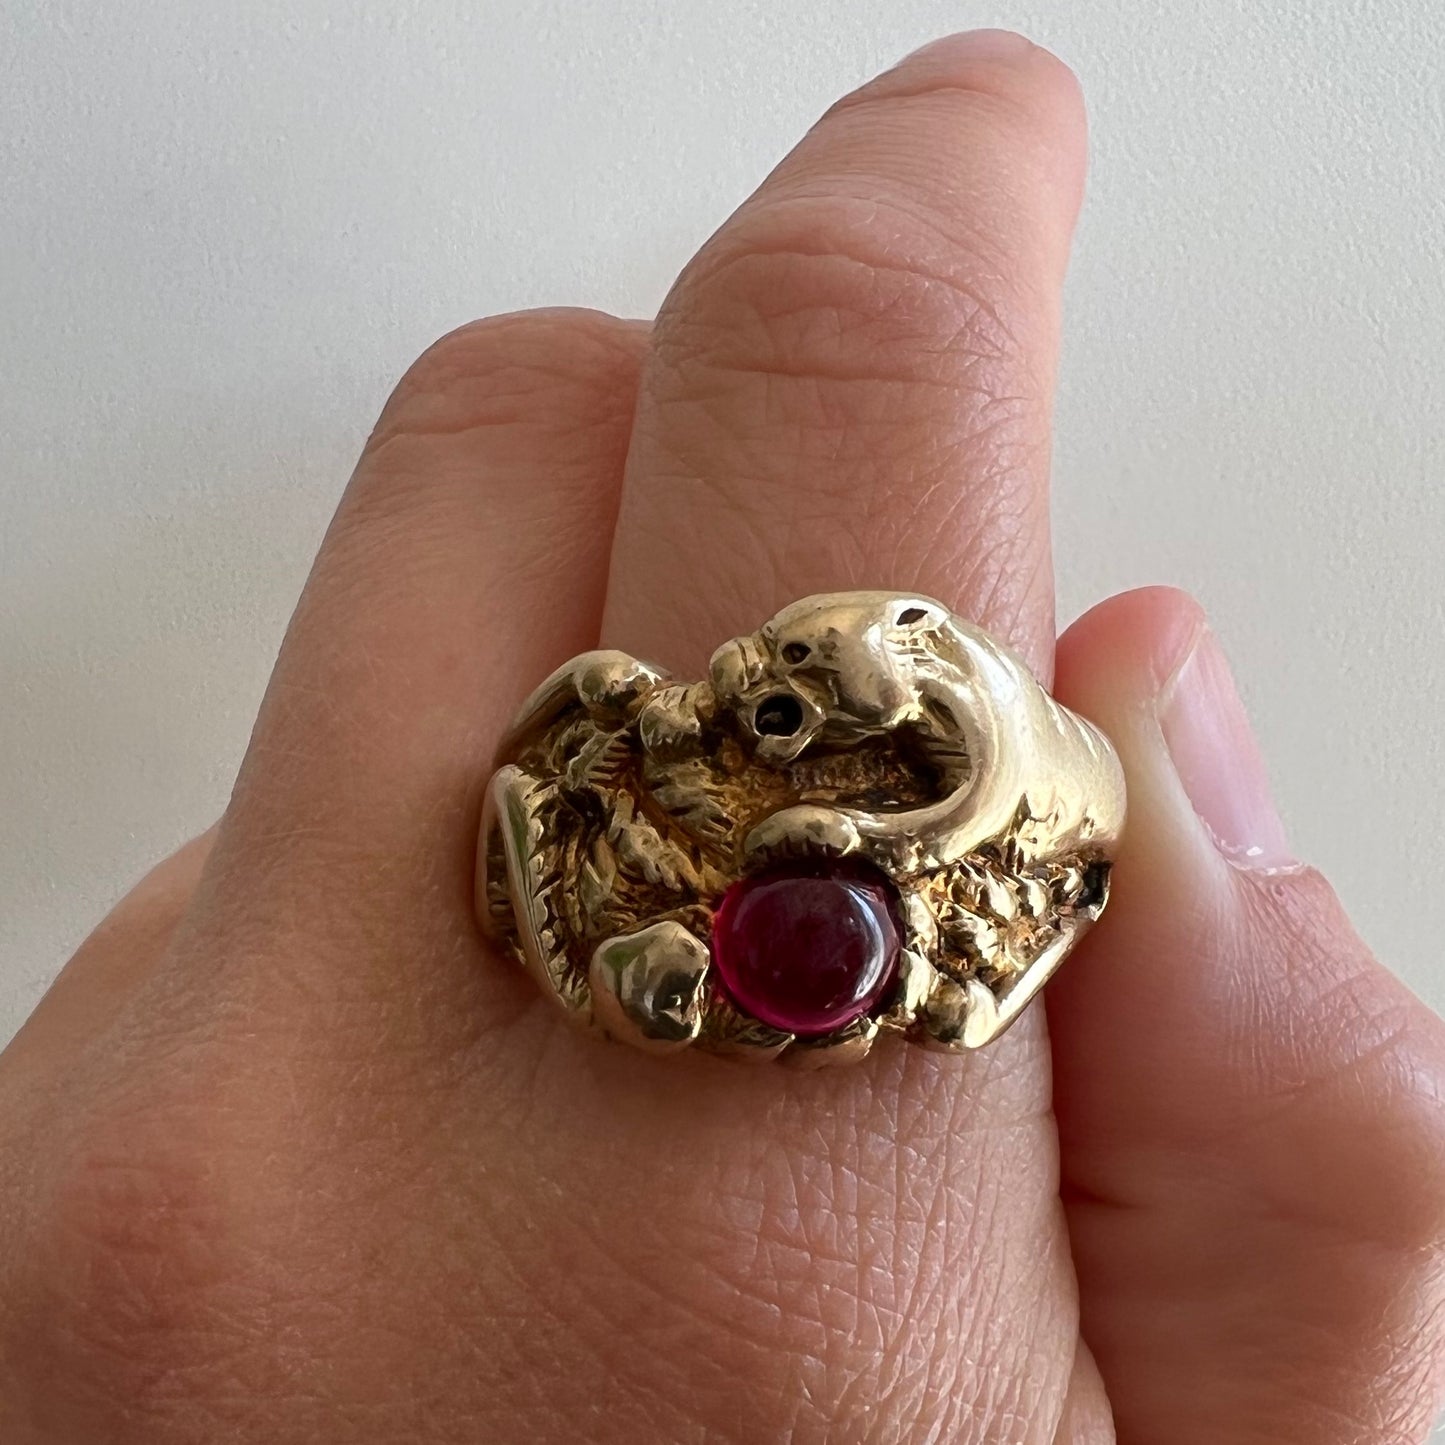 V I N T A G E // protective duo / 10k and red stone lion and snake ring / size 9.75-10